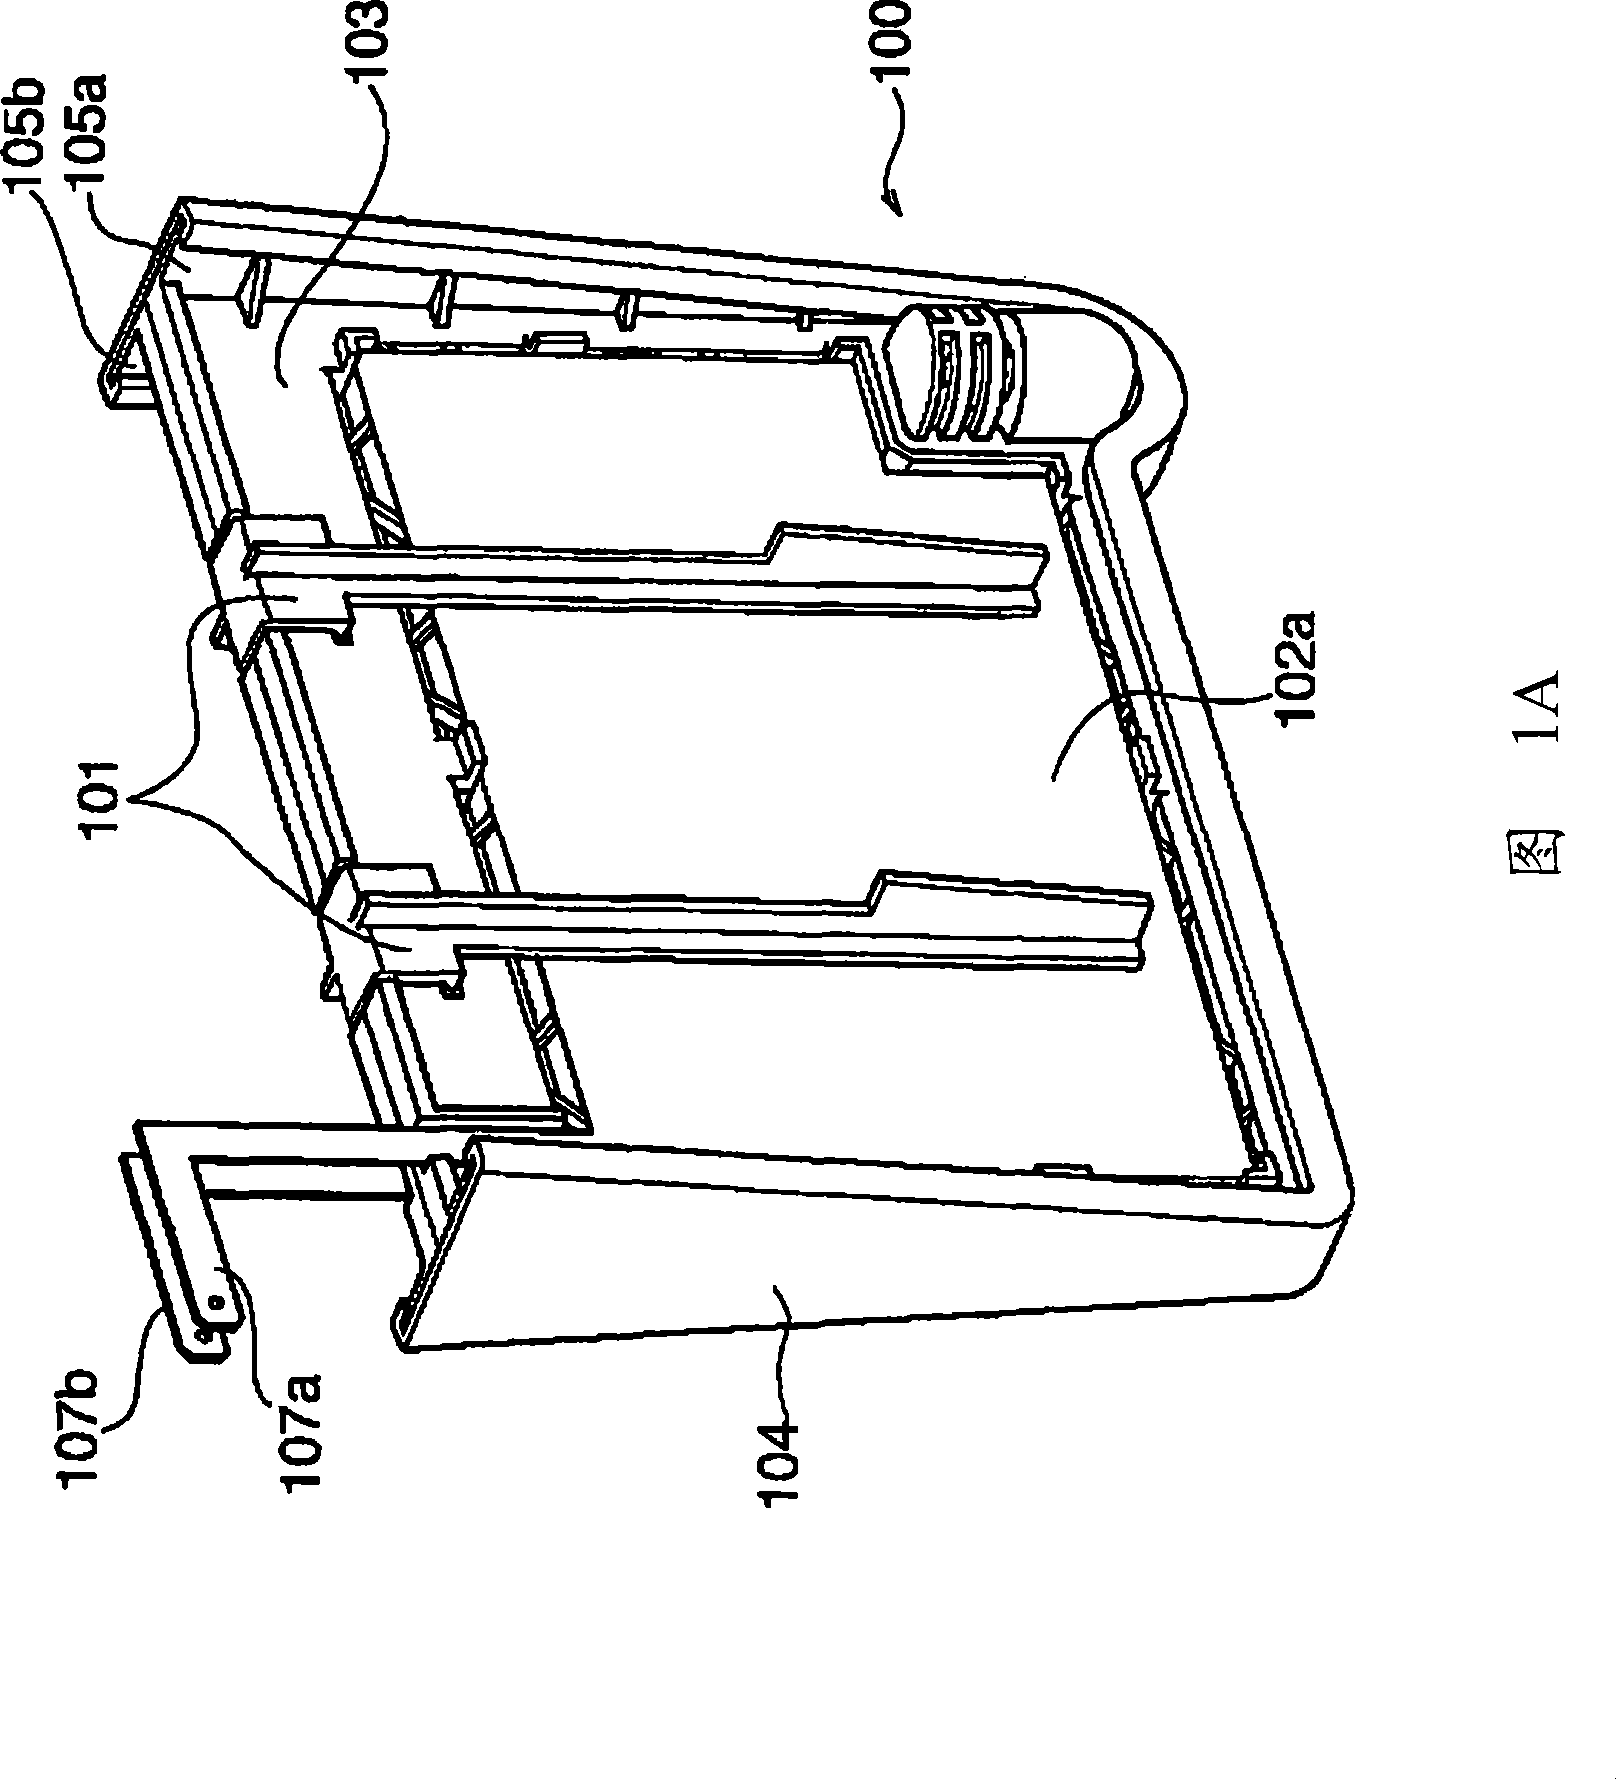 Electrolyzed water generator and electrode set with membrane used in the electrolyzed water generator